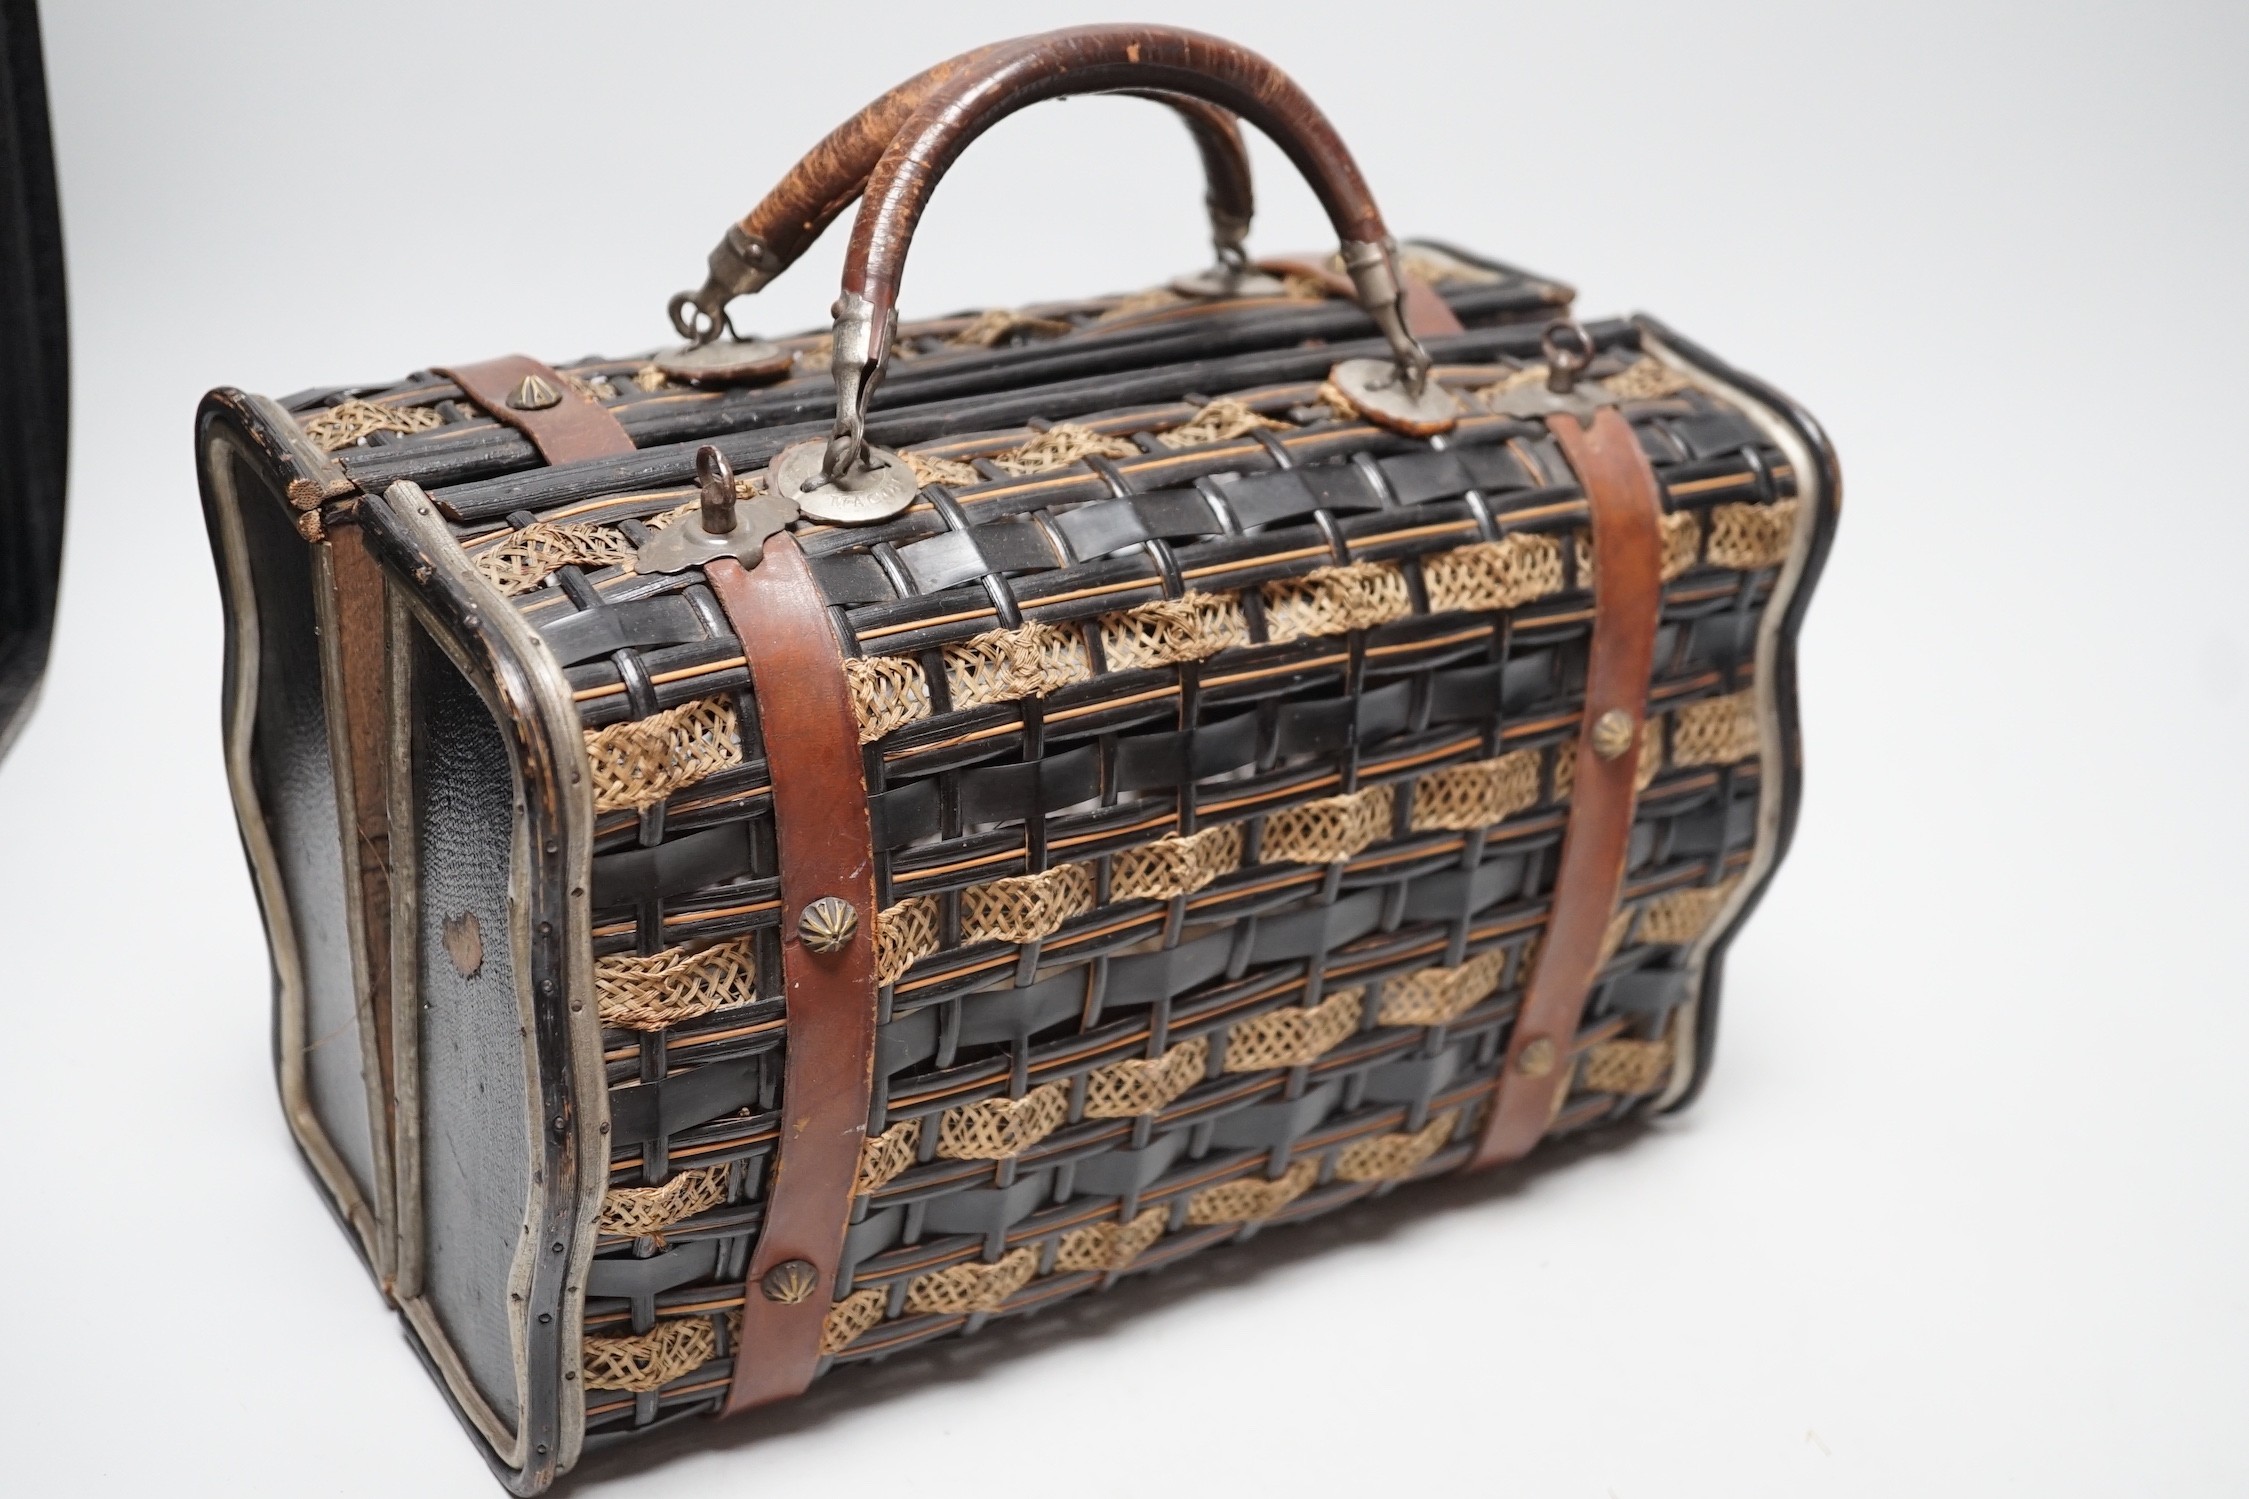 An unusual Edwardian straw and braided basket/bag, a French late 19th century basket with makers mark on metal mounts Berthelon, Macon, a small leather and velvet vanity case and contents and leather stationary case